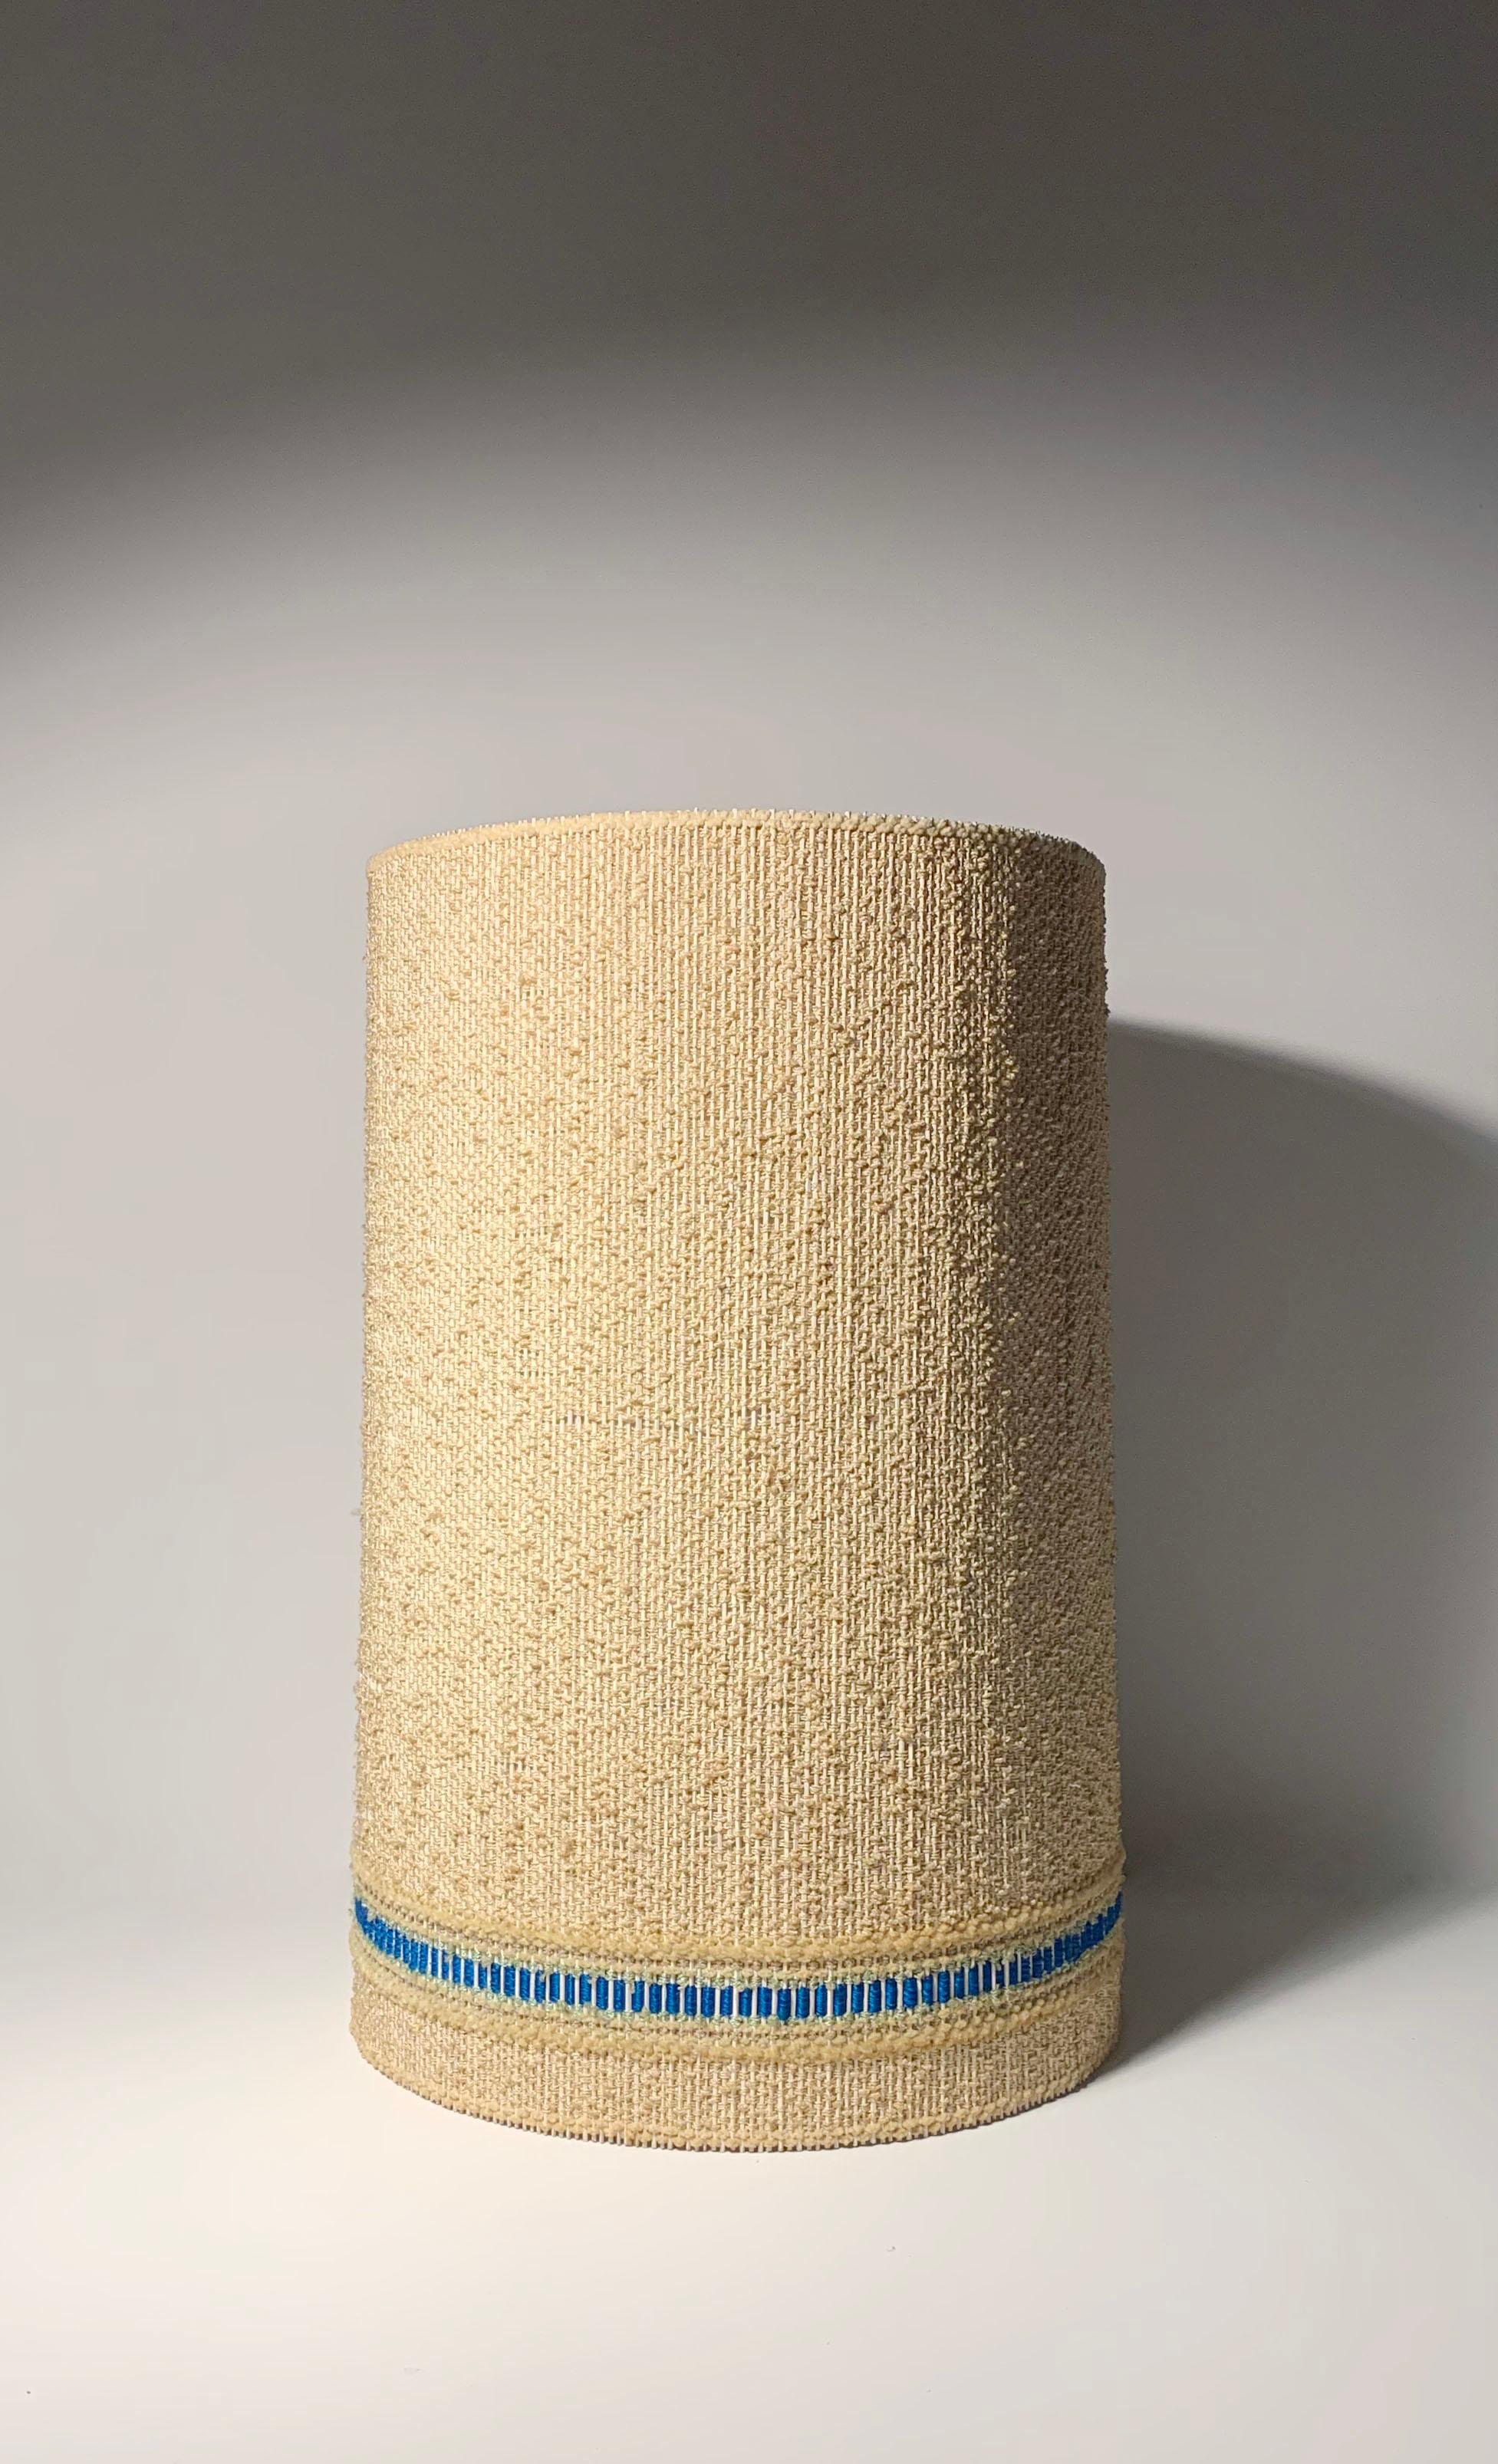 Large Vintage Cylinder Drum Shade attributed to Maria Kipp.

this lamp shade came from a very clean older estate with period 1950s/60s designer items. Appears to be by Maria Kipp. Please review photos with detail images.